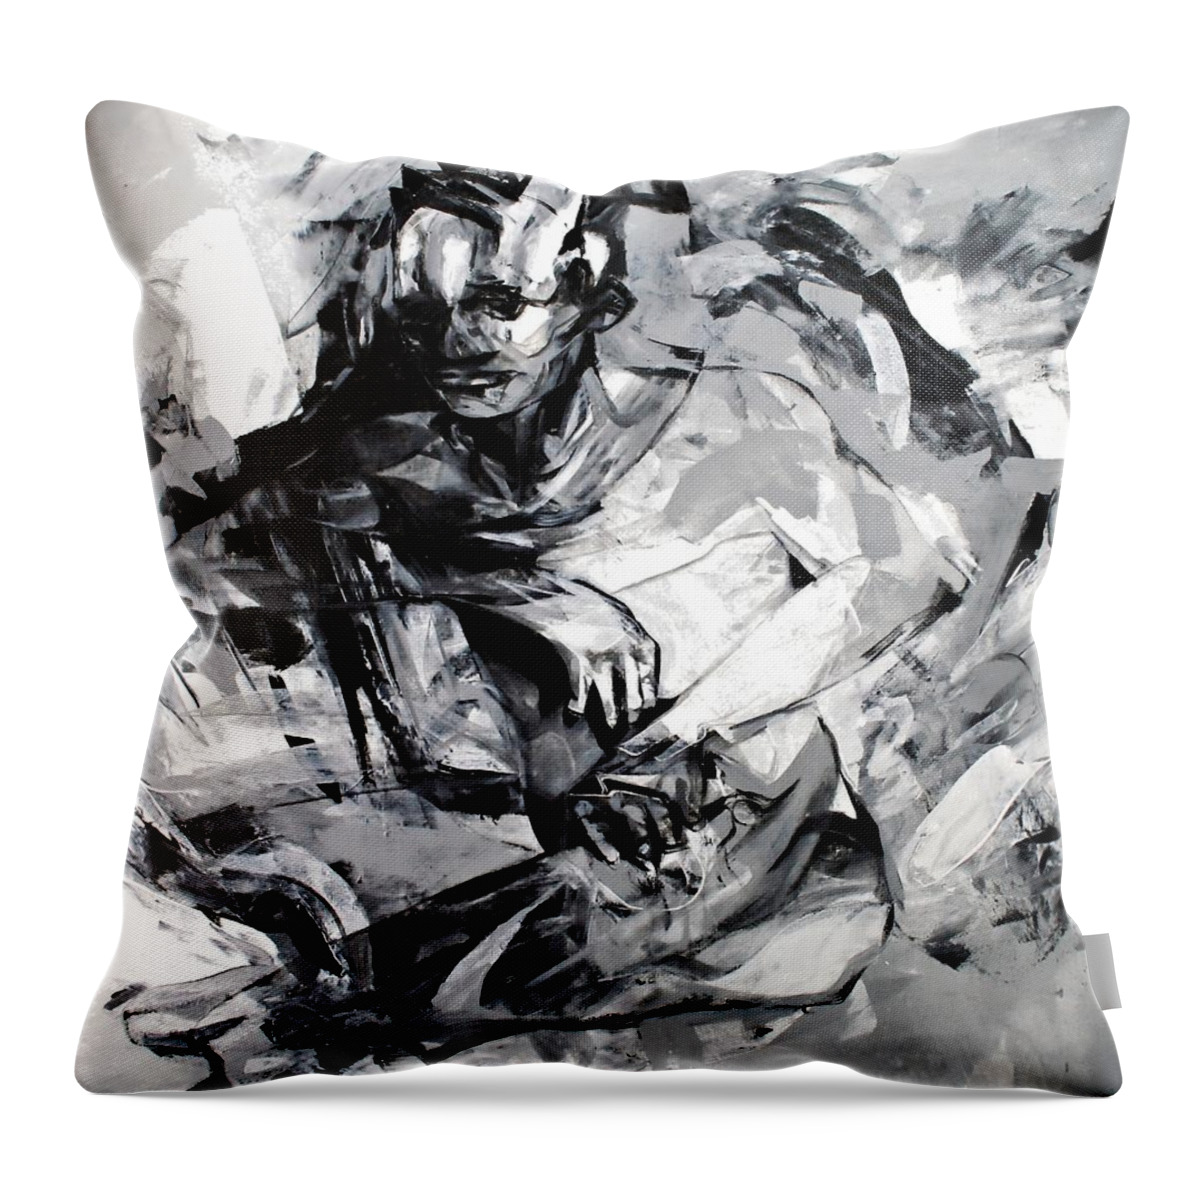 Savage Throw Pillow featuring the painting Savage Realization by Jeff Klena